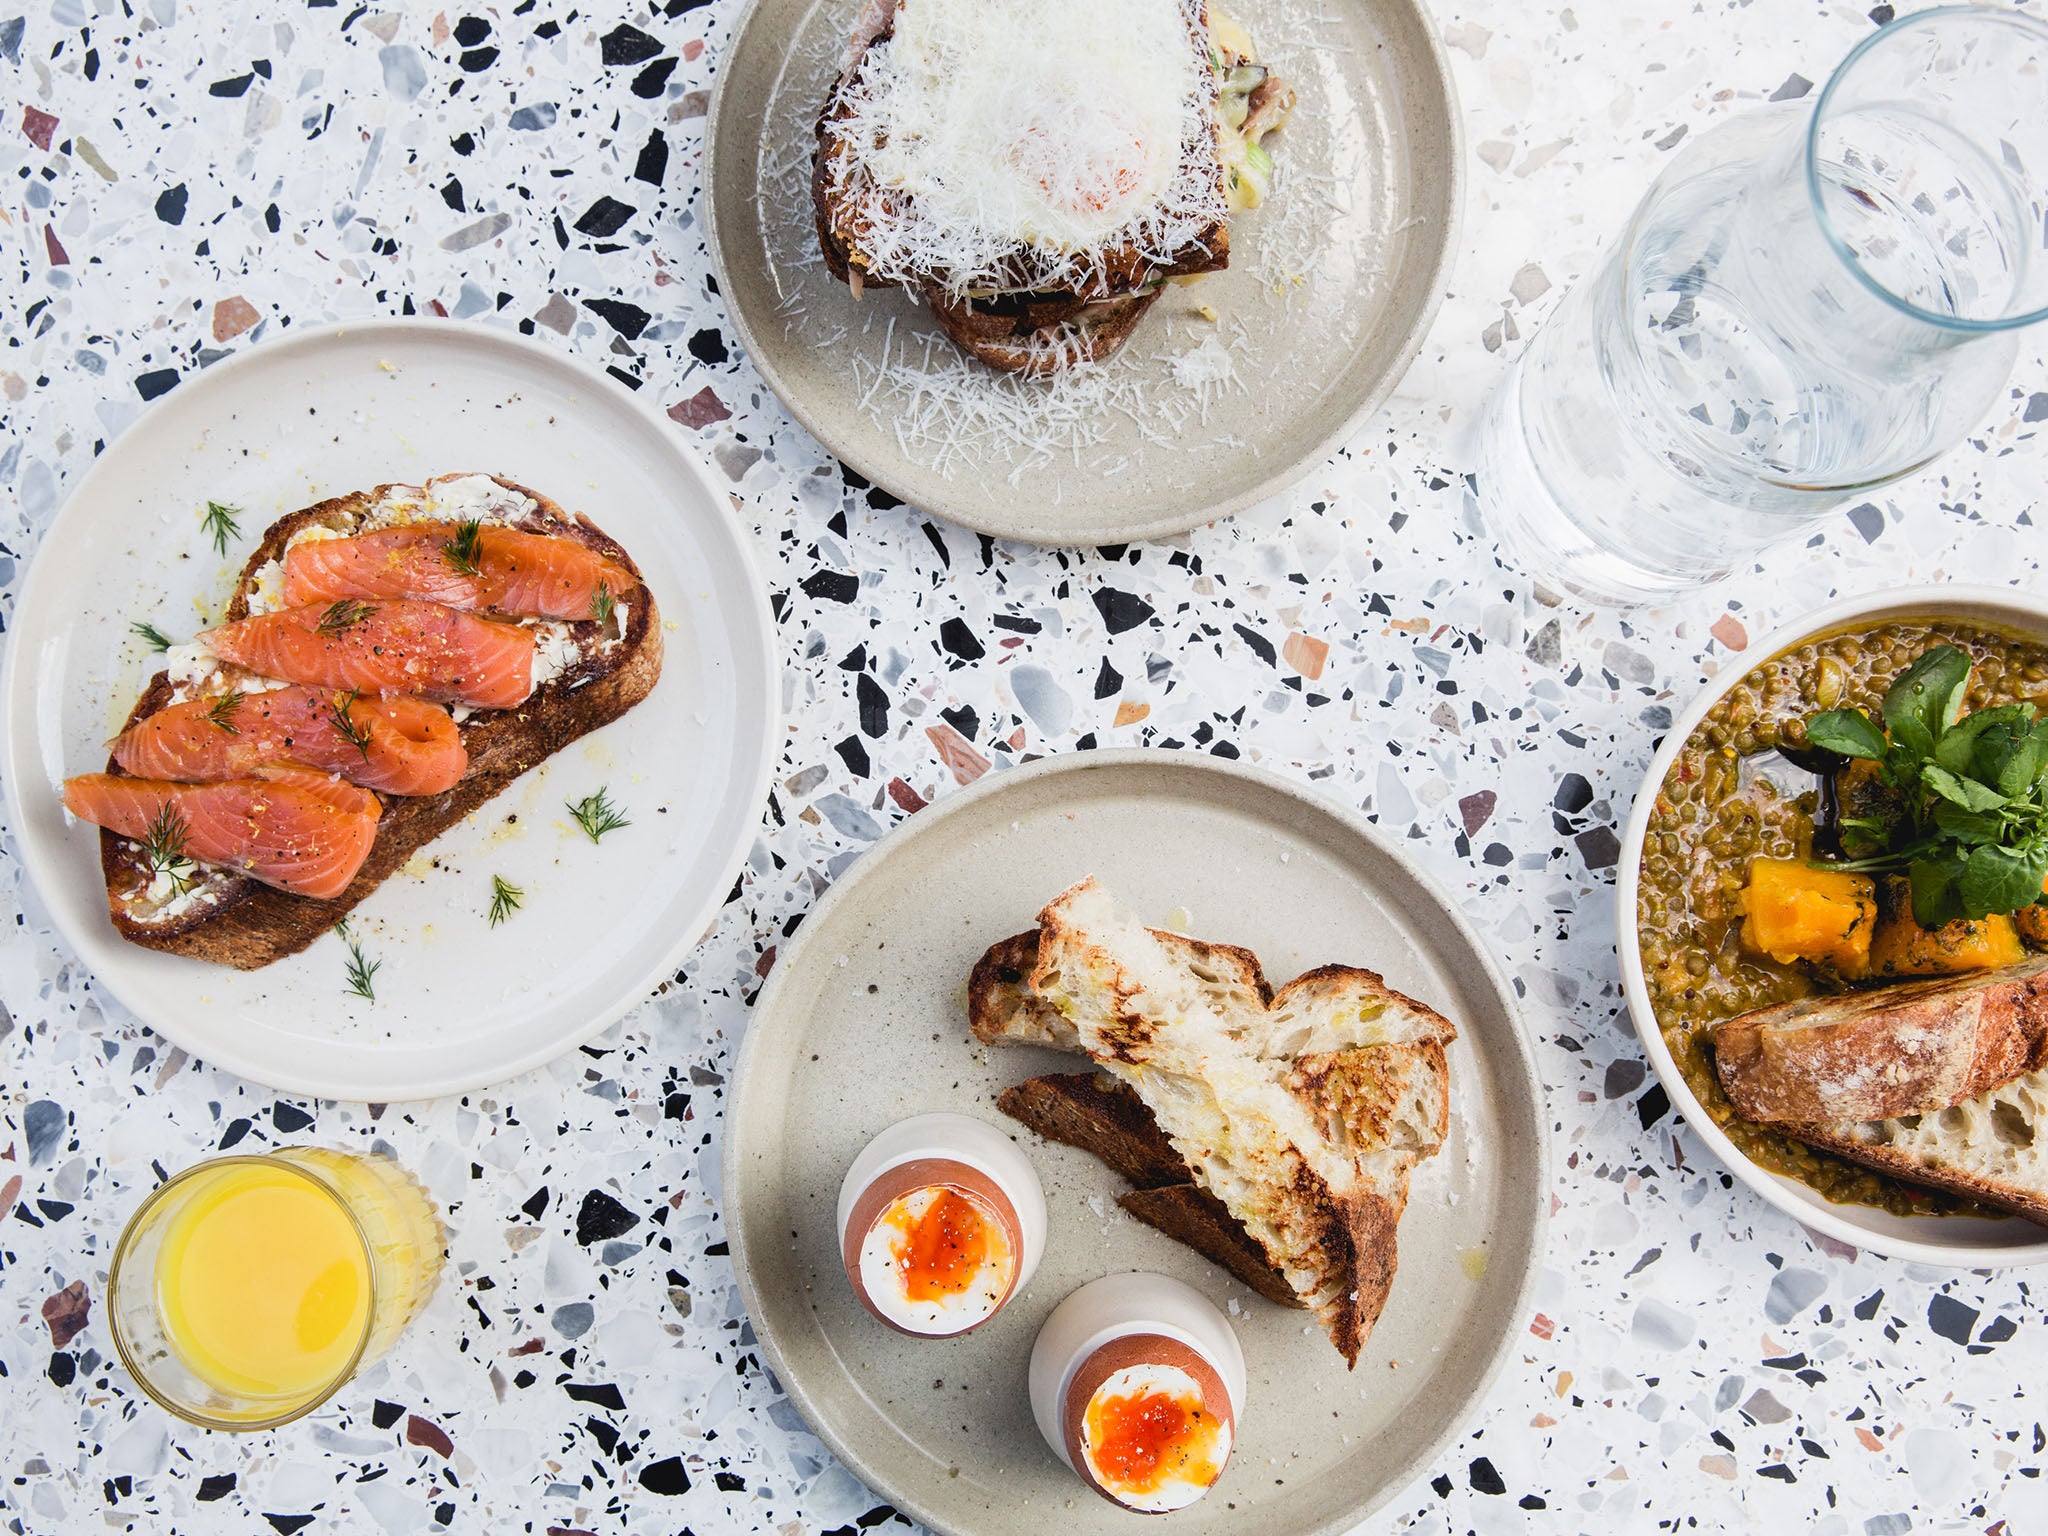 Crispin offers fresh food and coffee in Spitalfields